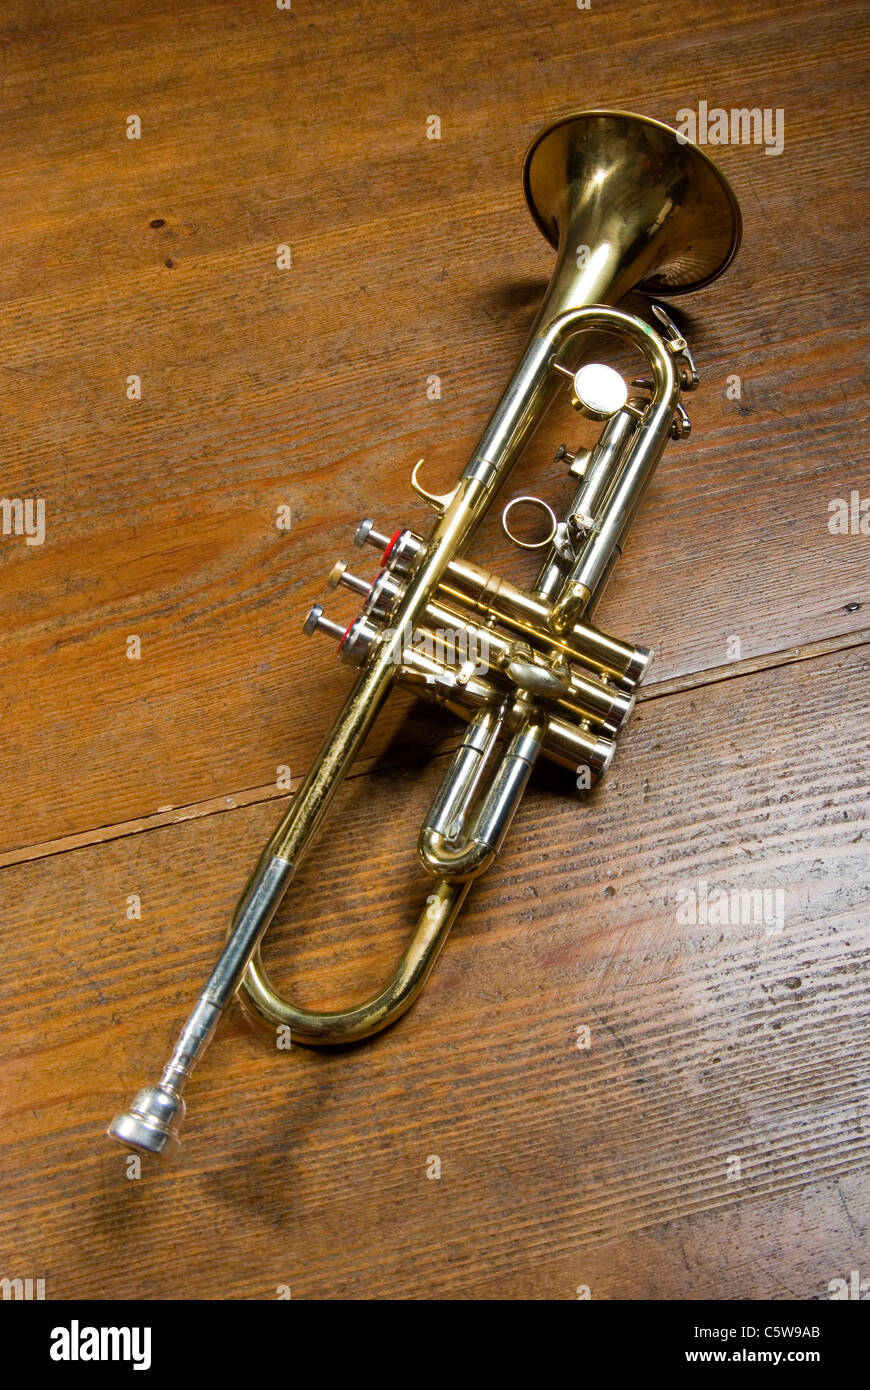 Trumpet on wooden floor, elevated view Stock Photo